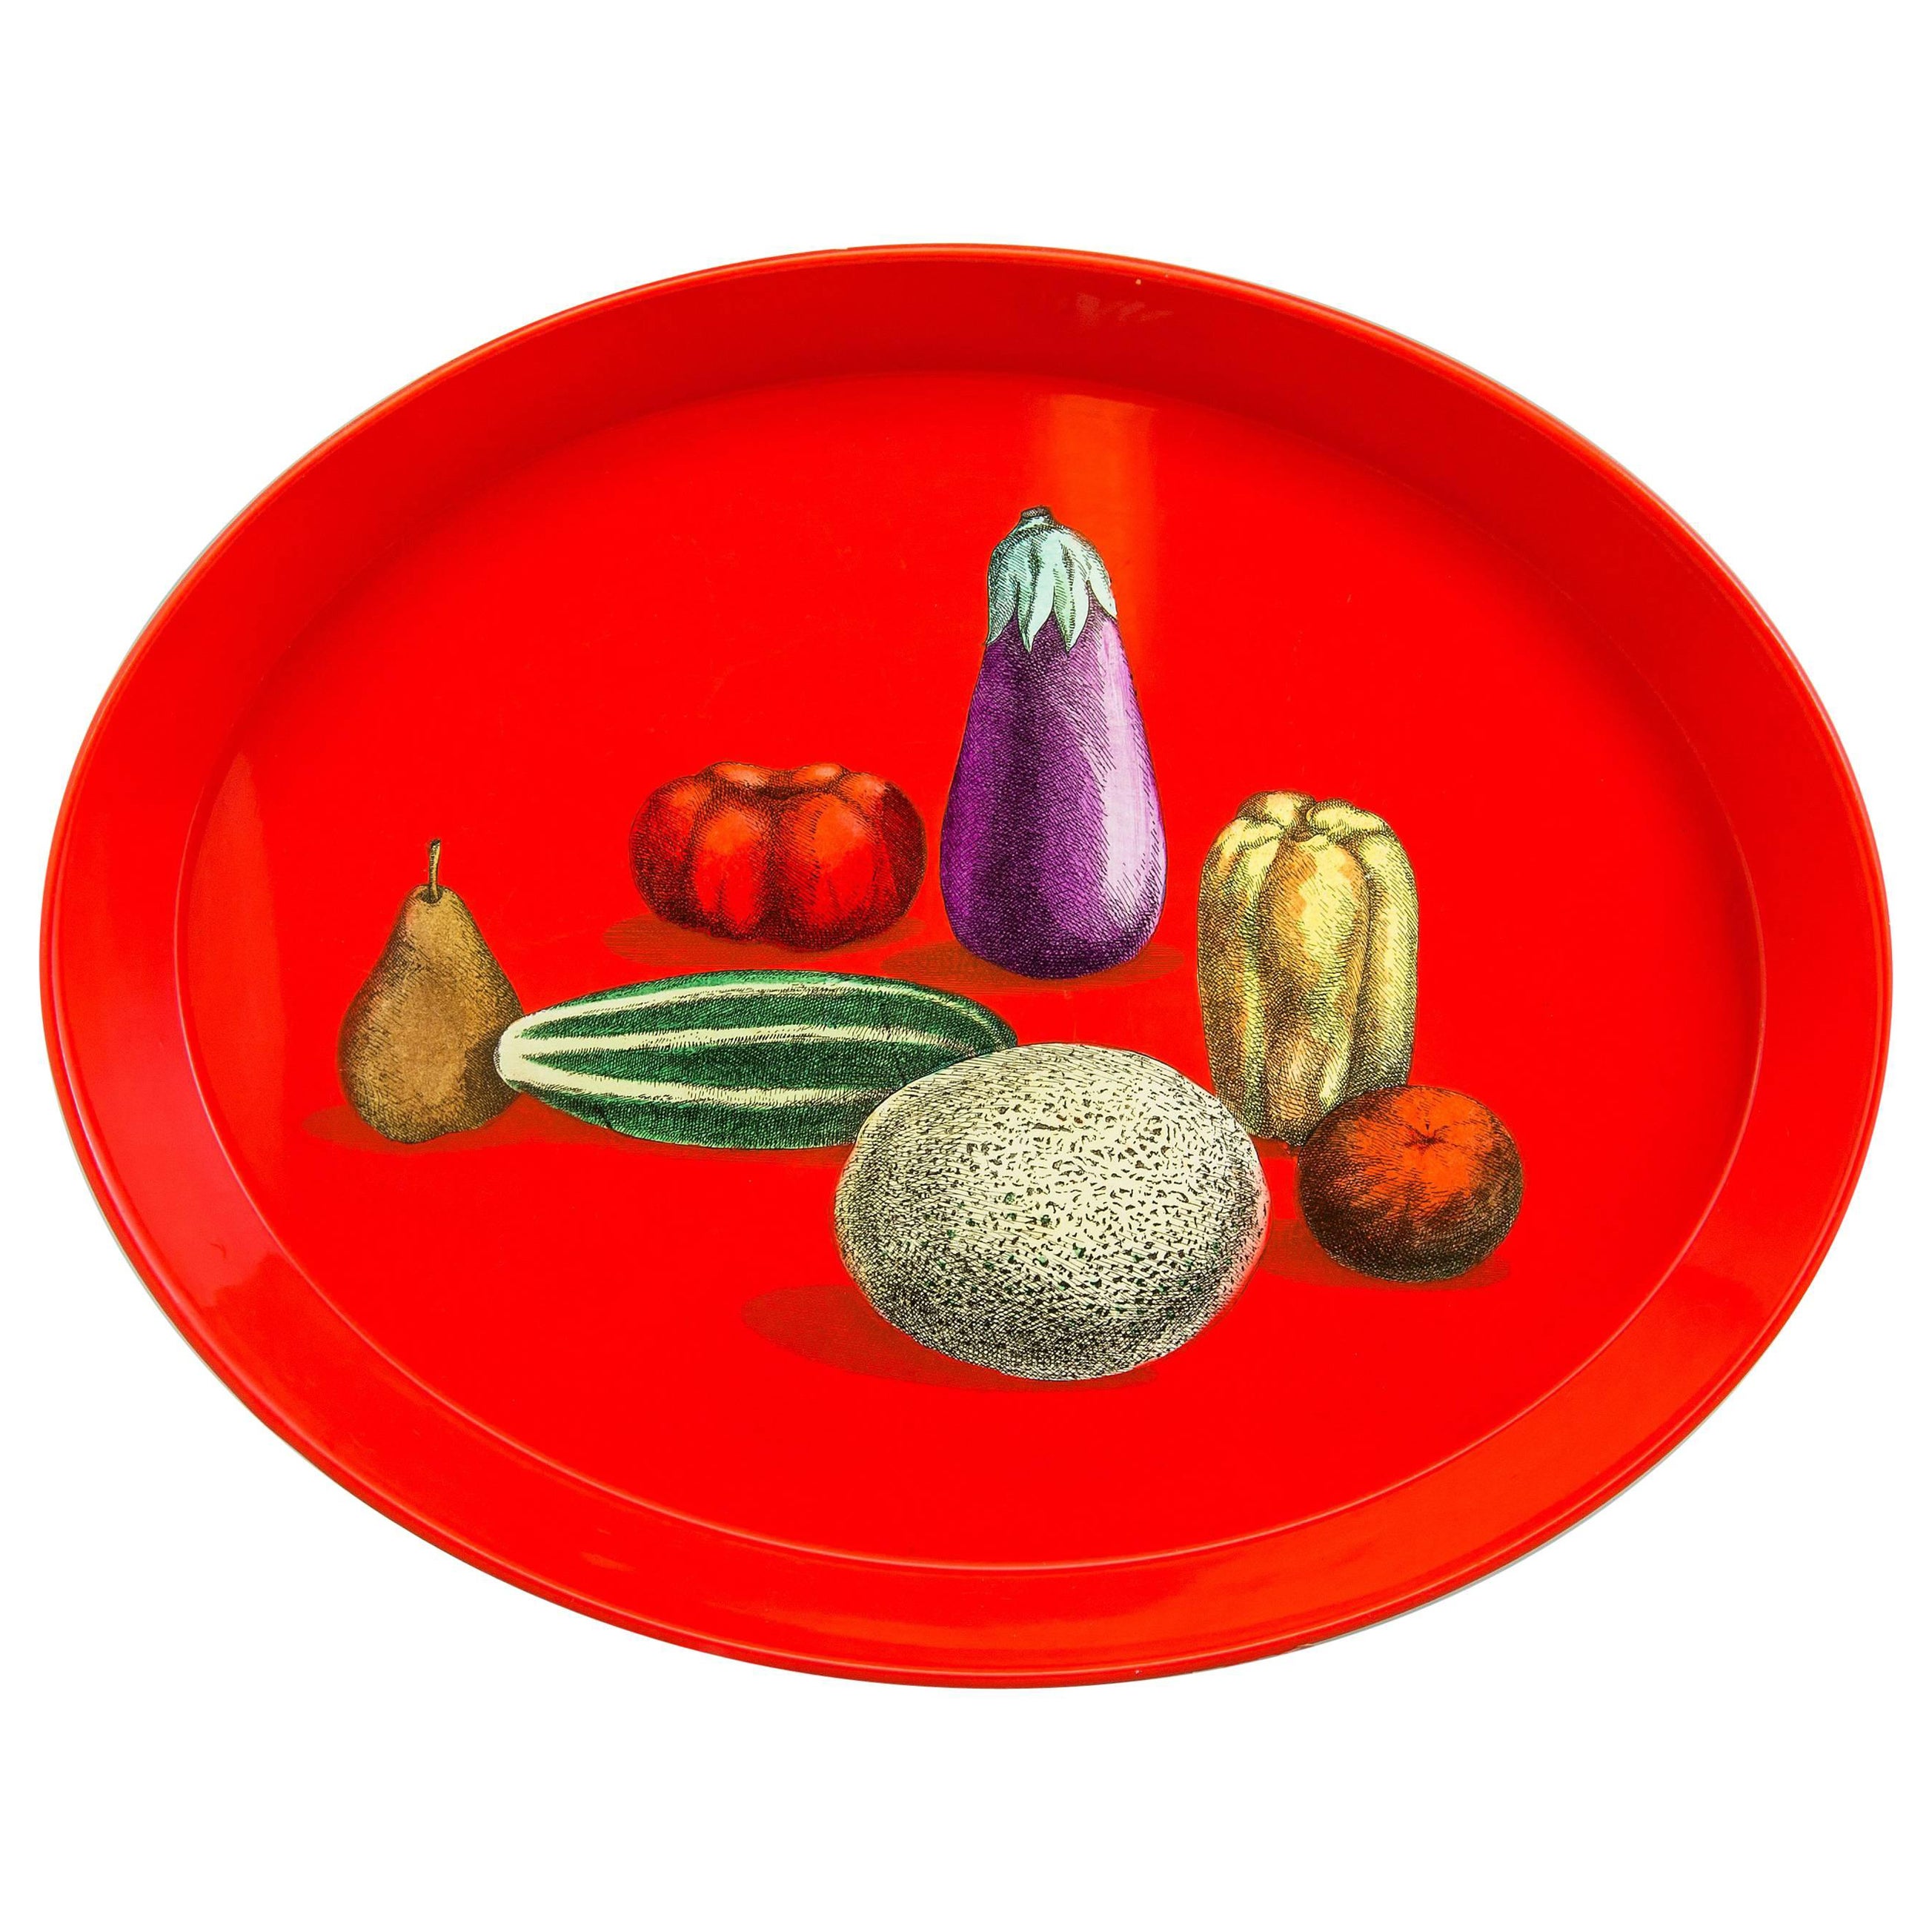 This is how you serve your guests in style!

A Piero Fornasetti tray with still life, Natura Morta pattern, Mid- 1950s.

This is a wonderful early 1950s oval red tray depicting various vegetables in a still life composition in excellent